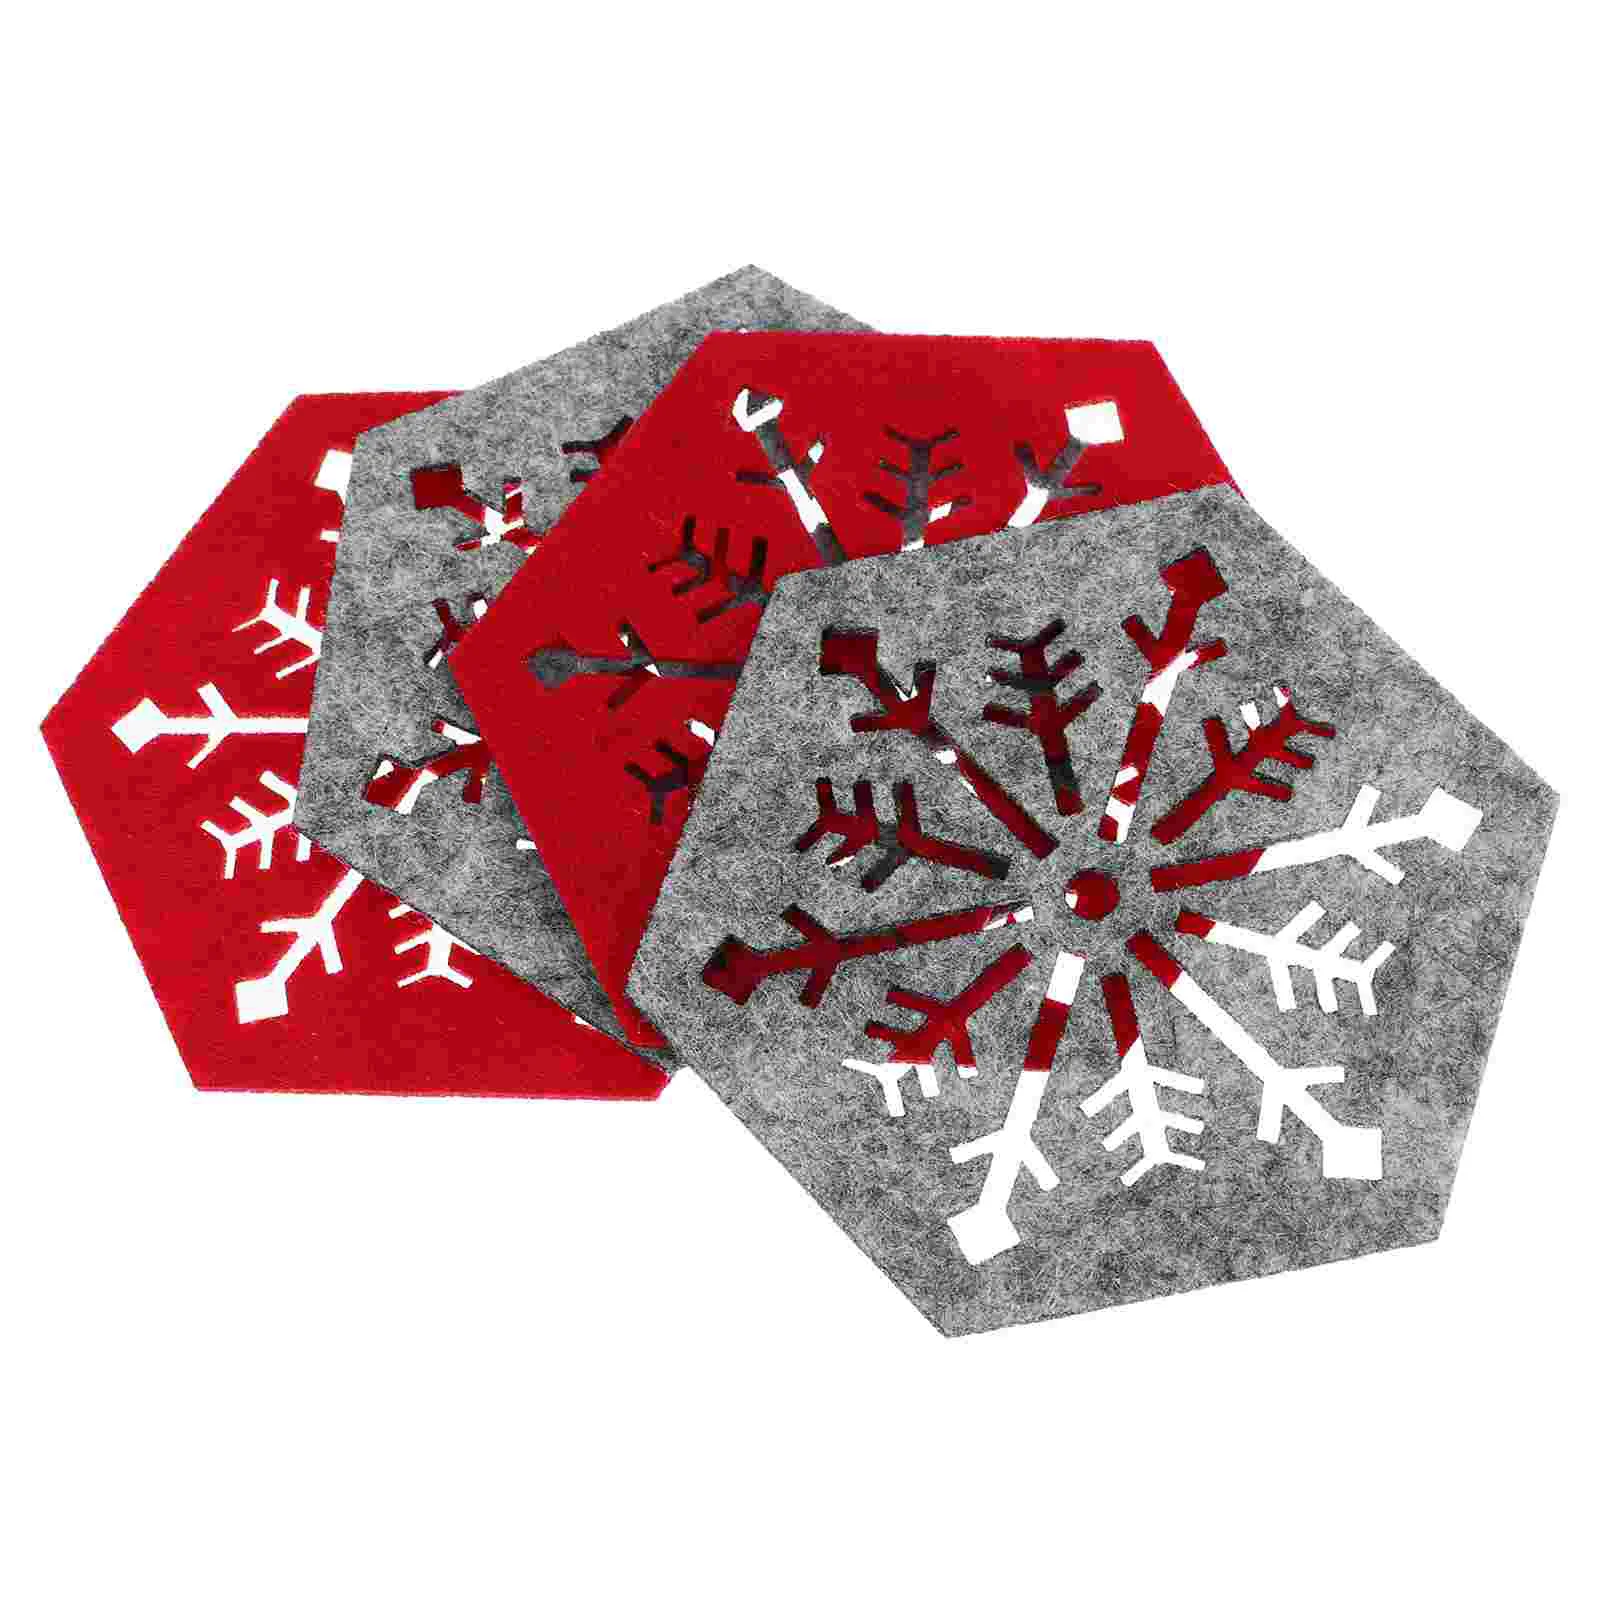 

4 Pcs The Office Decor Snowflake Pattern Table Mats Christmas Supplies Desktop Decore Party Dinner Placemats Cloth Drinks